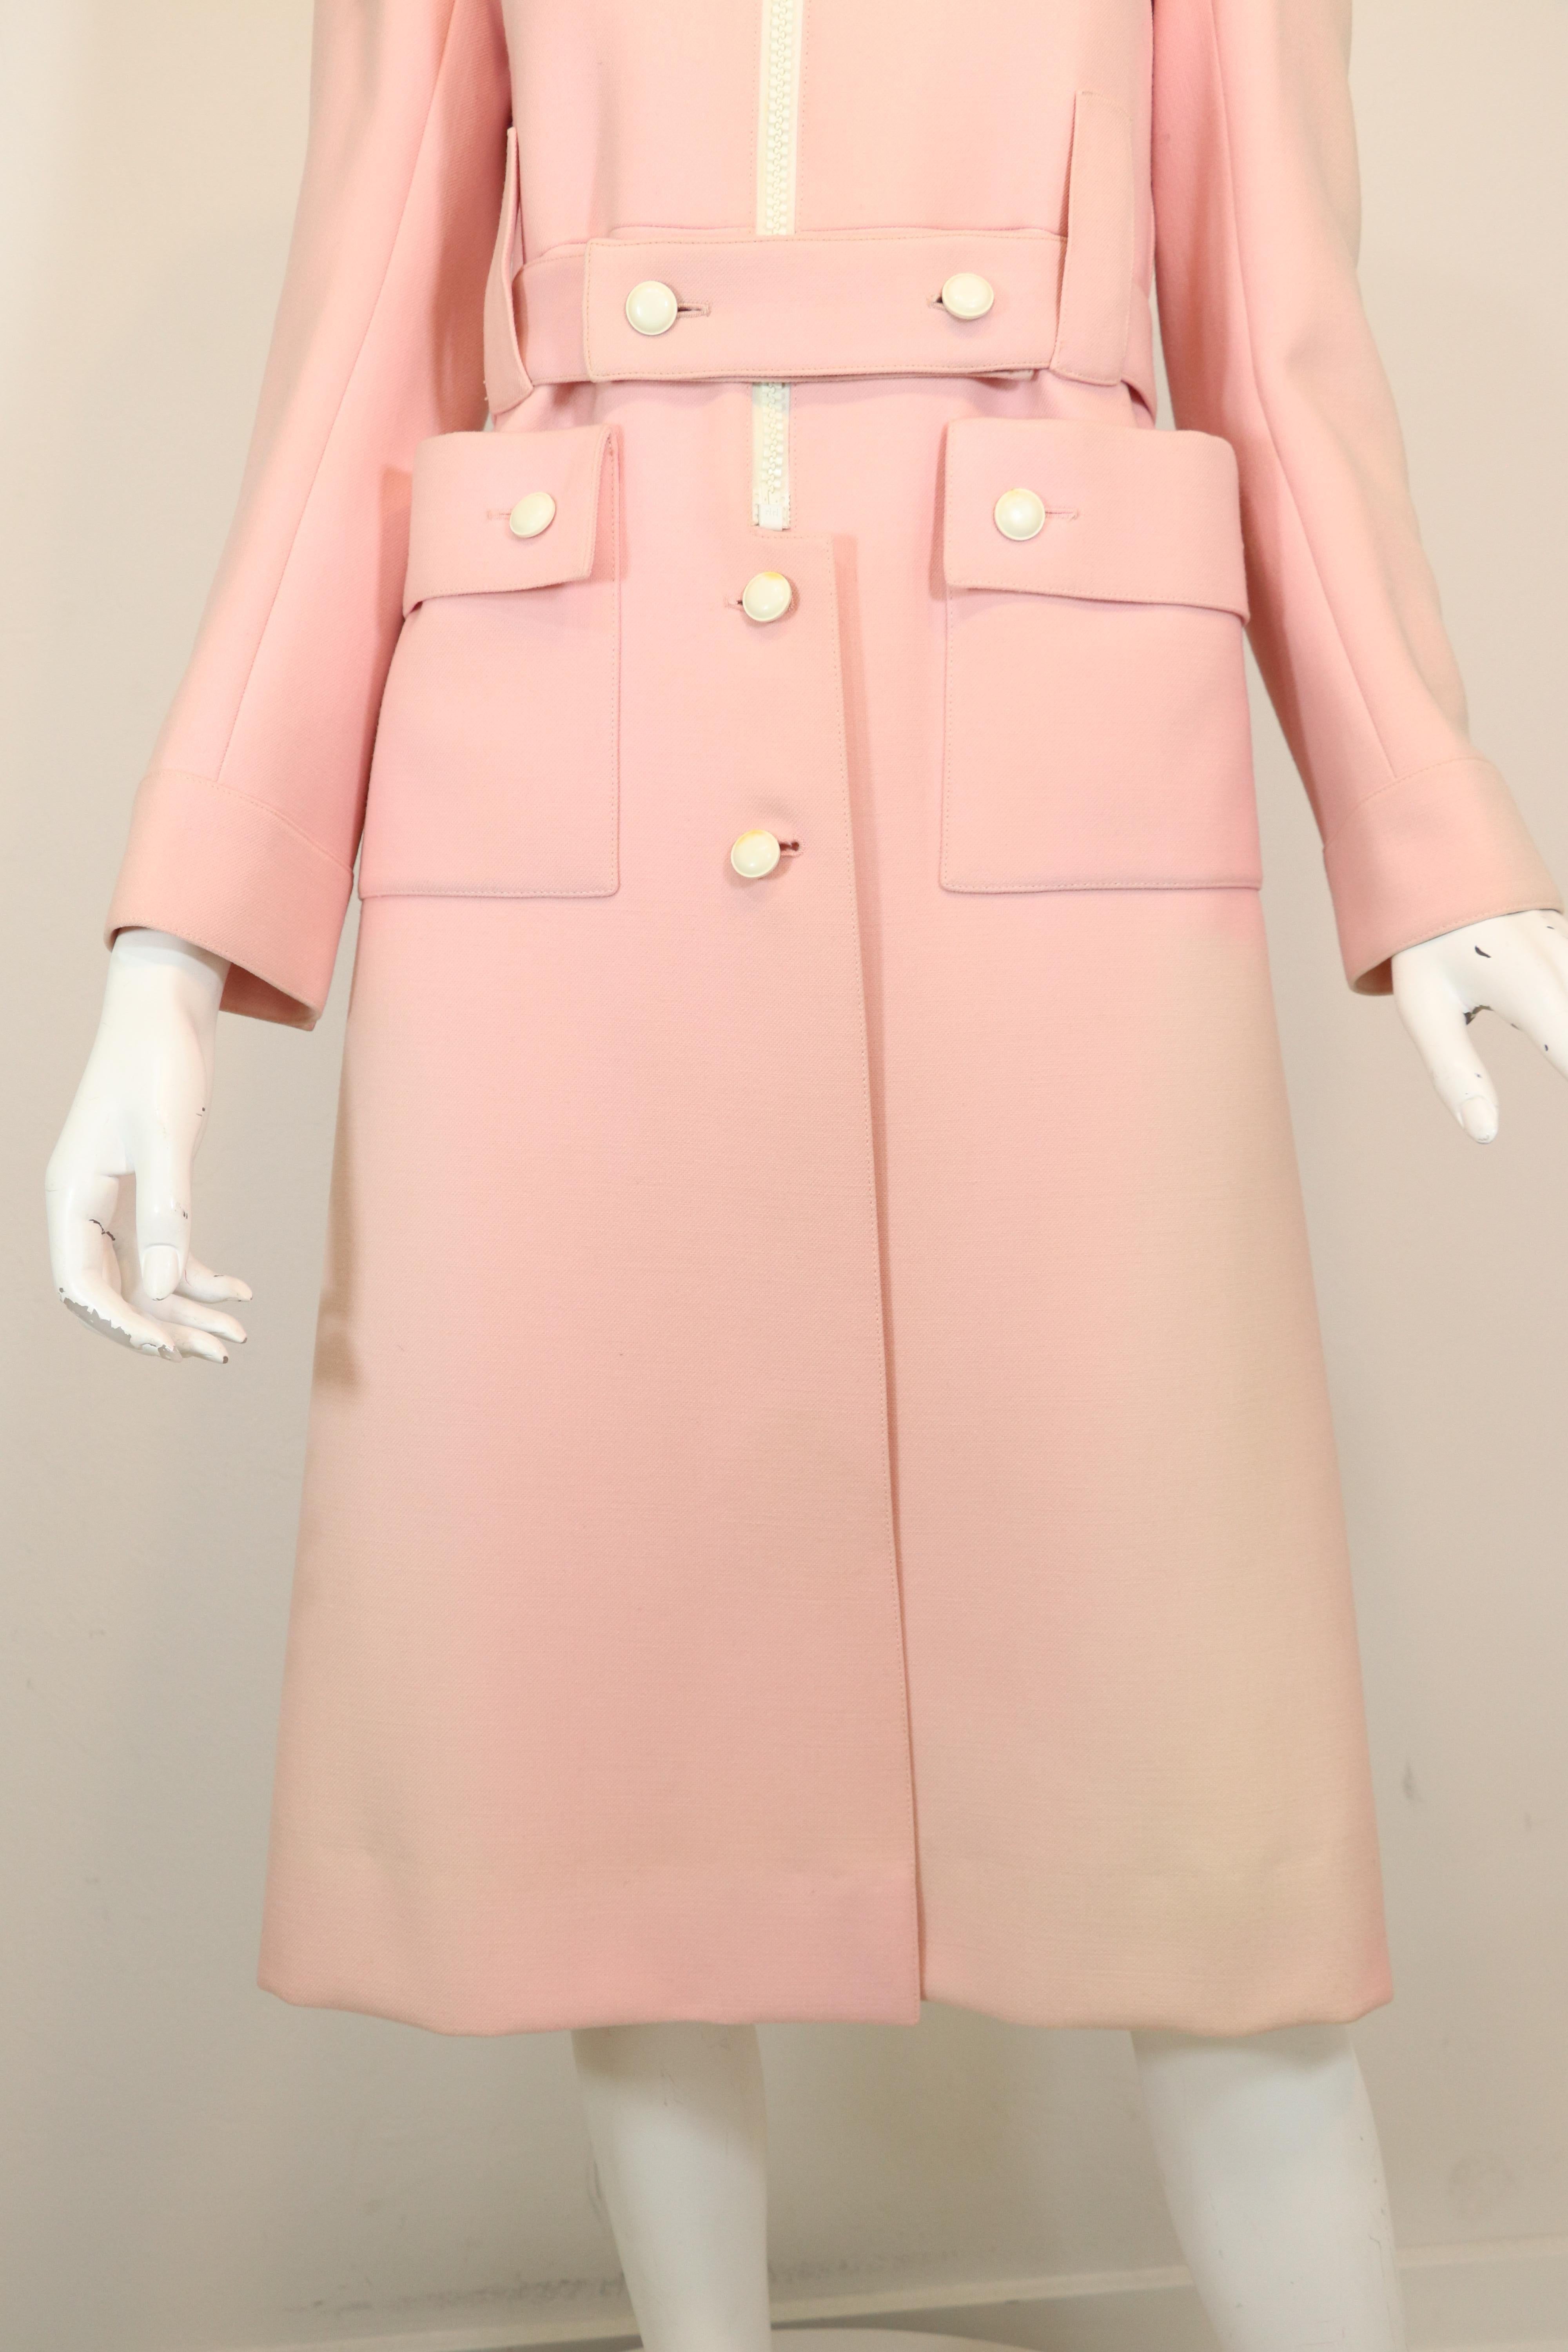 Women's Courreges Couture Future Vintage 1970's Pink Structured Wool Coat